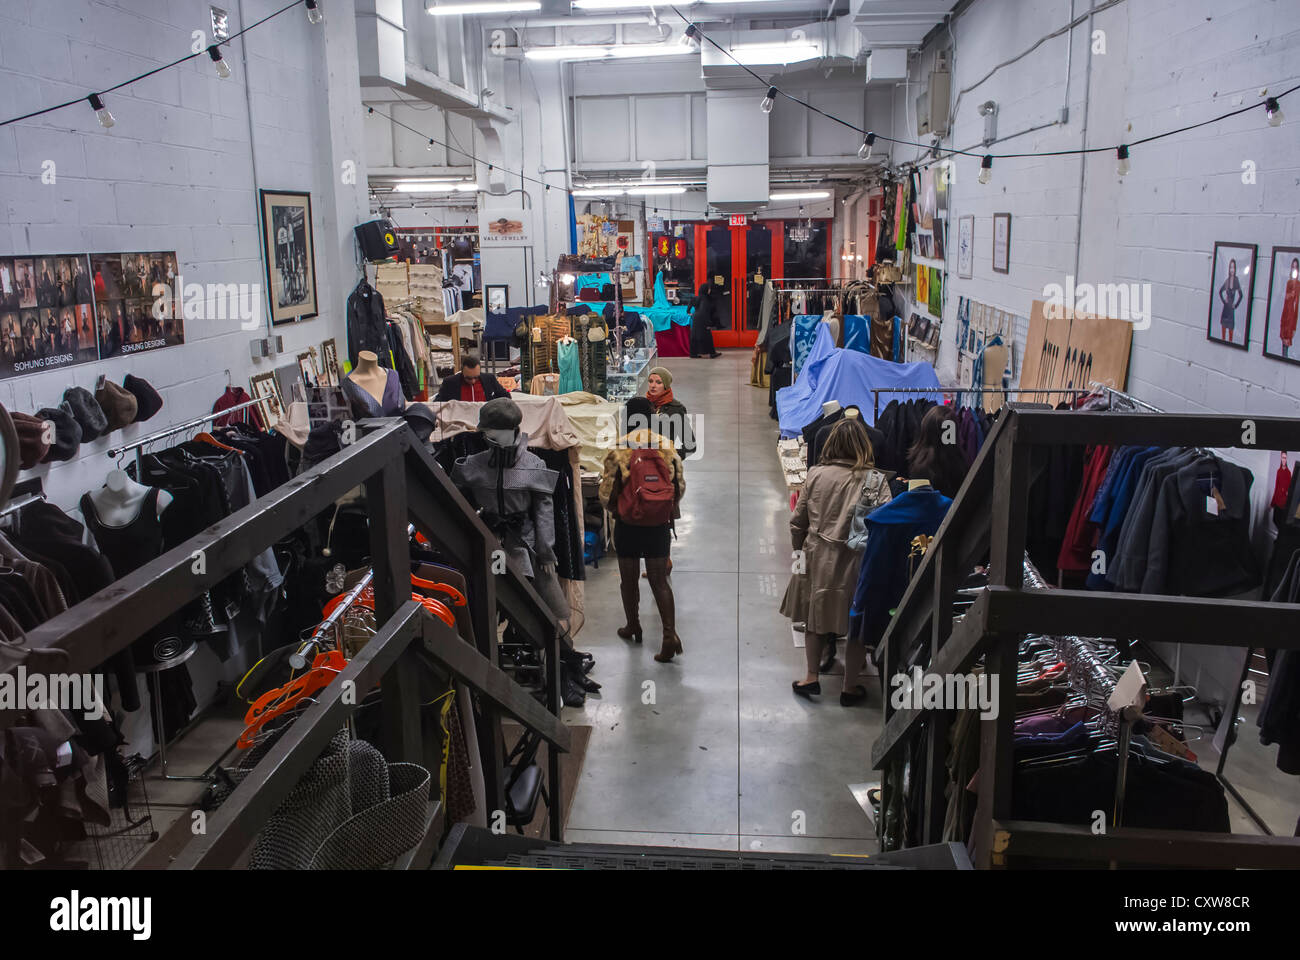 New York City, NY, USA, Small Crowd People, Women Clothes Shopping inside 'Artists Vintage' Store in the Chelsea Market, Shopping Center,  Manhattan vintage market, old clothing shopping Stock Photo